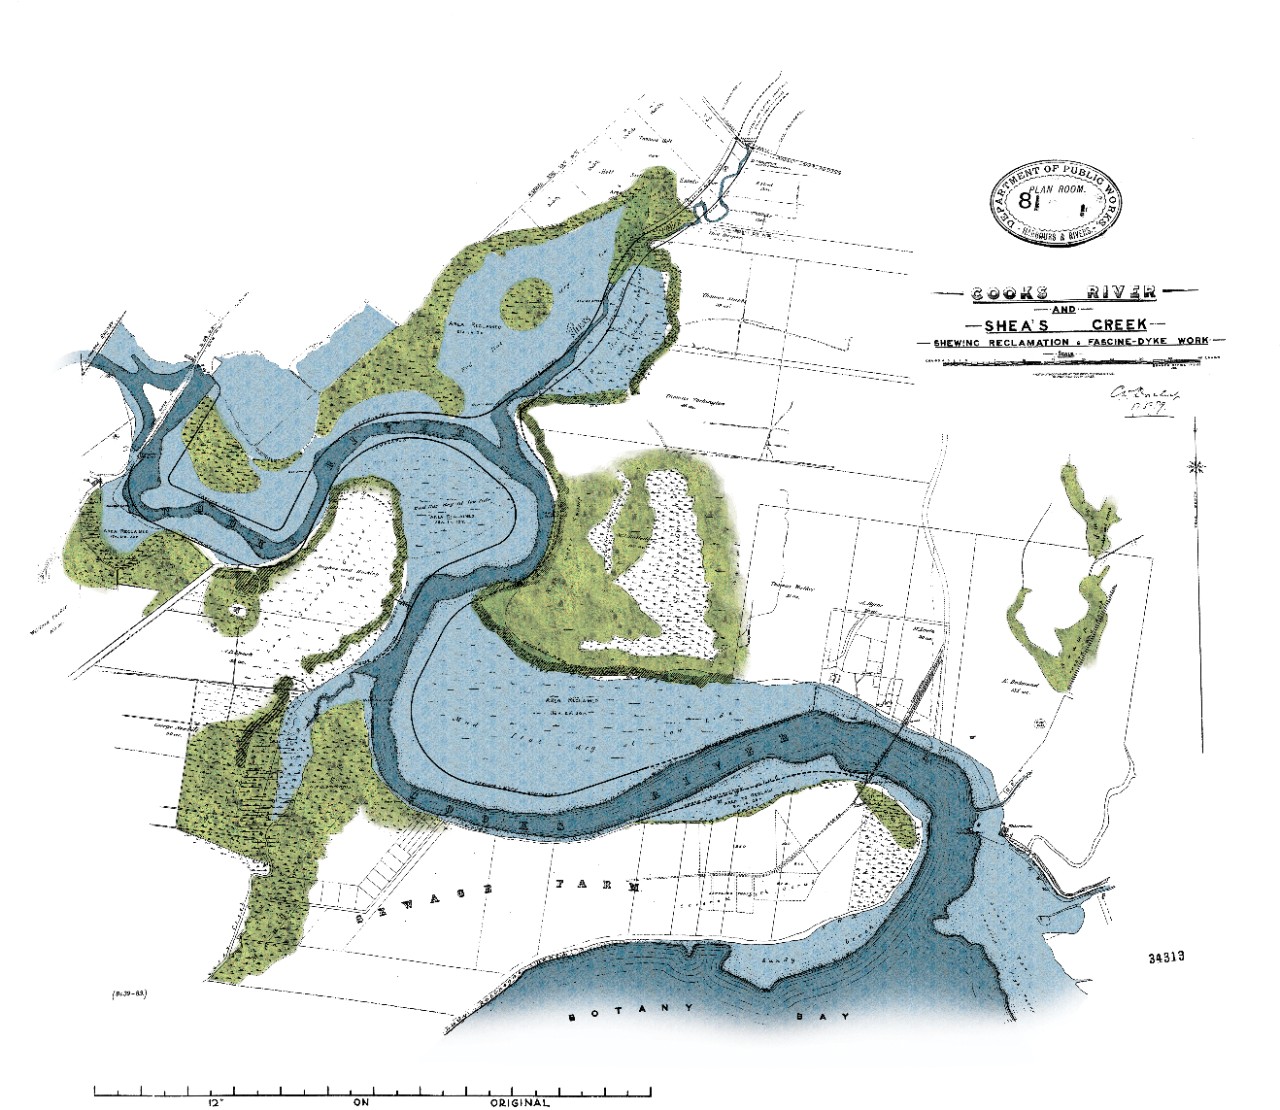 Overlay of Cooks River